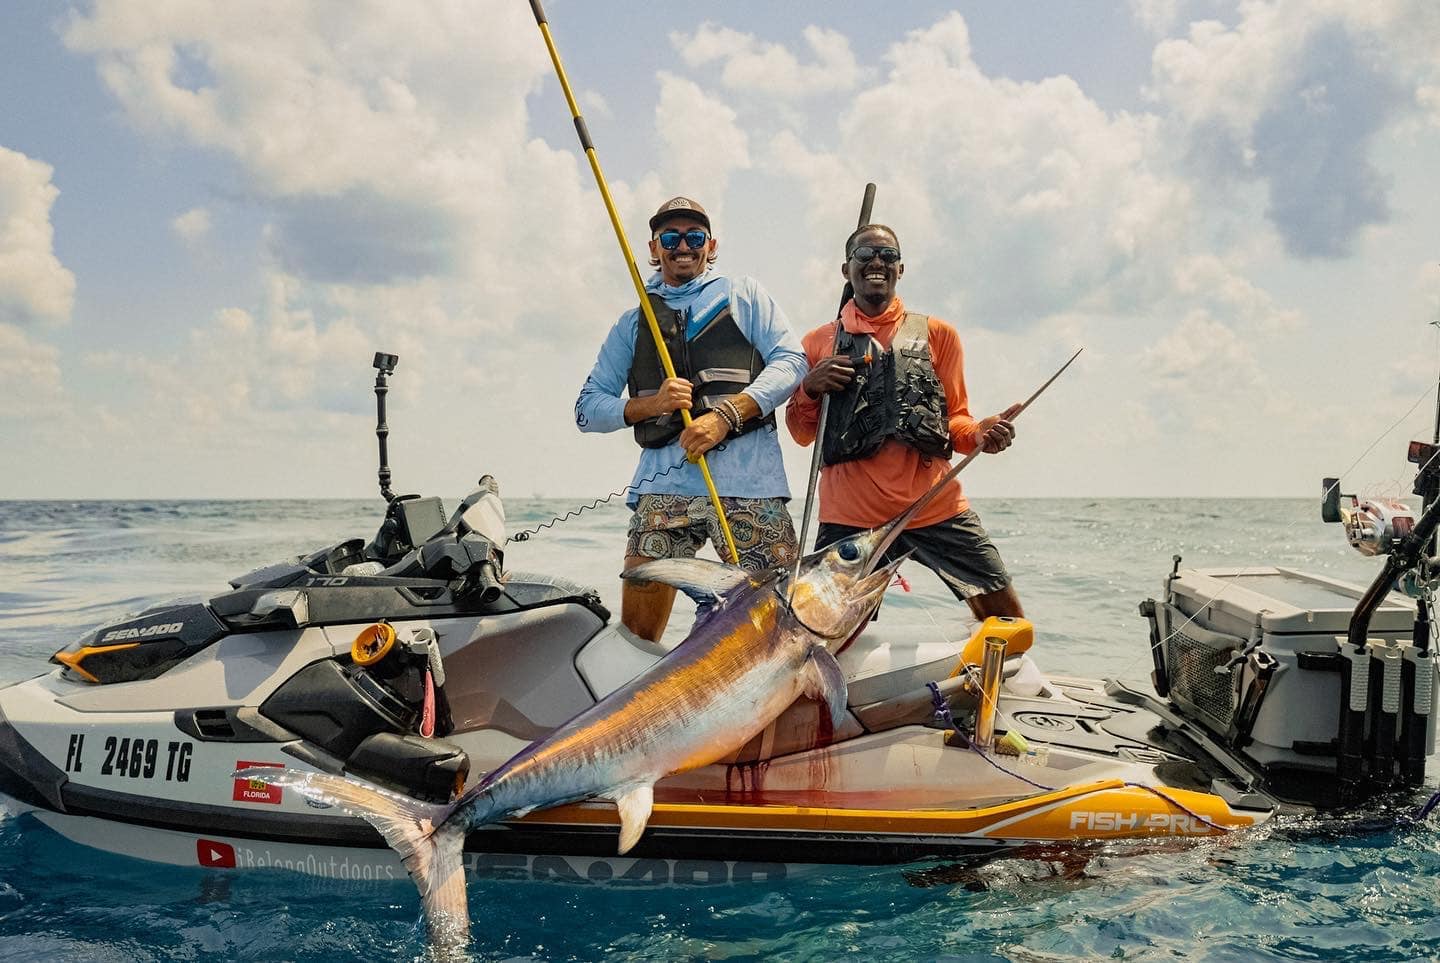 Watch: Anglers Become First to Catch a Swordfish from a Jet Ski